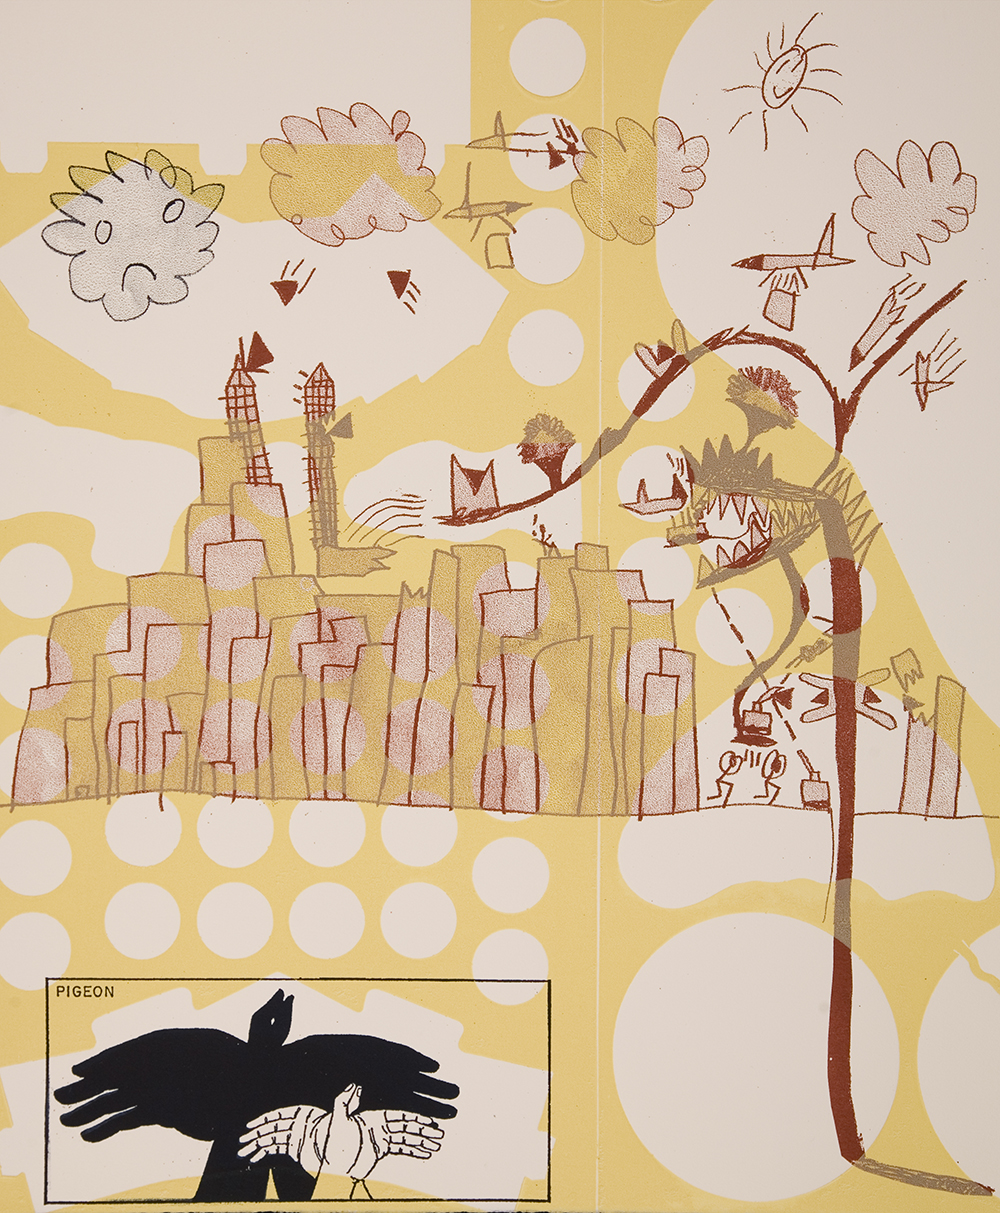 a print that looks like a child’s line drawing in sepia and black ink of a city with skyscrapers. Four clouds, one with a frowny face, are in the sky. A sun with a smiley face is in the upper right sky. A large Venus fly trap plant grows from the ground and is facing the city with its mouth open. Planes fly around the plant. The bottom left corner has a box with two hands making a bird hand shadow.